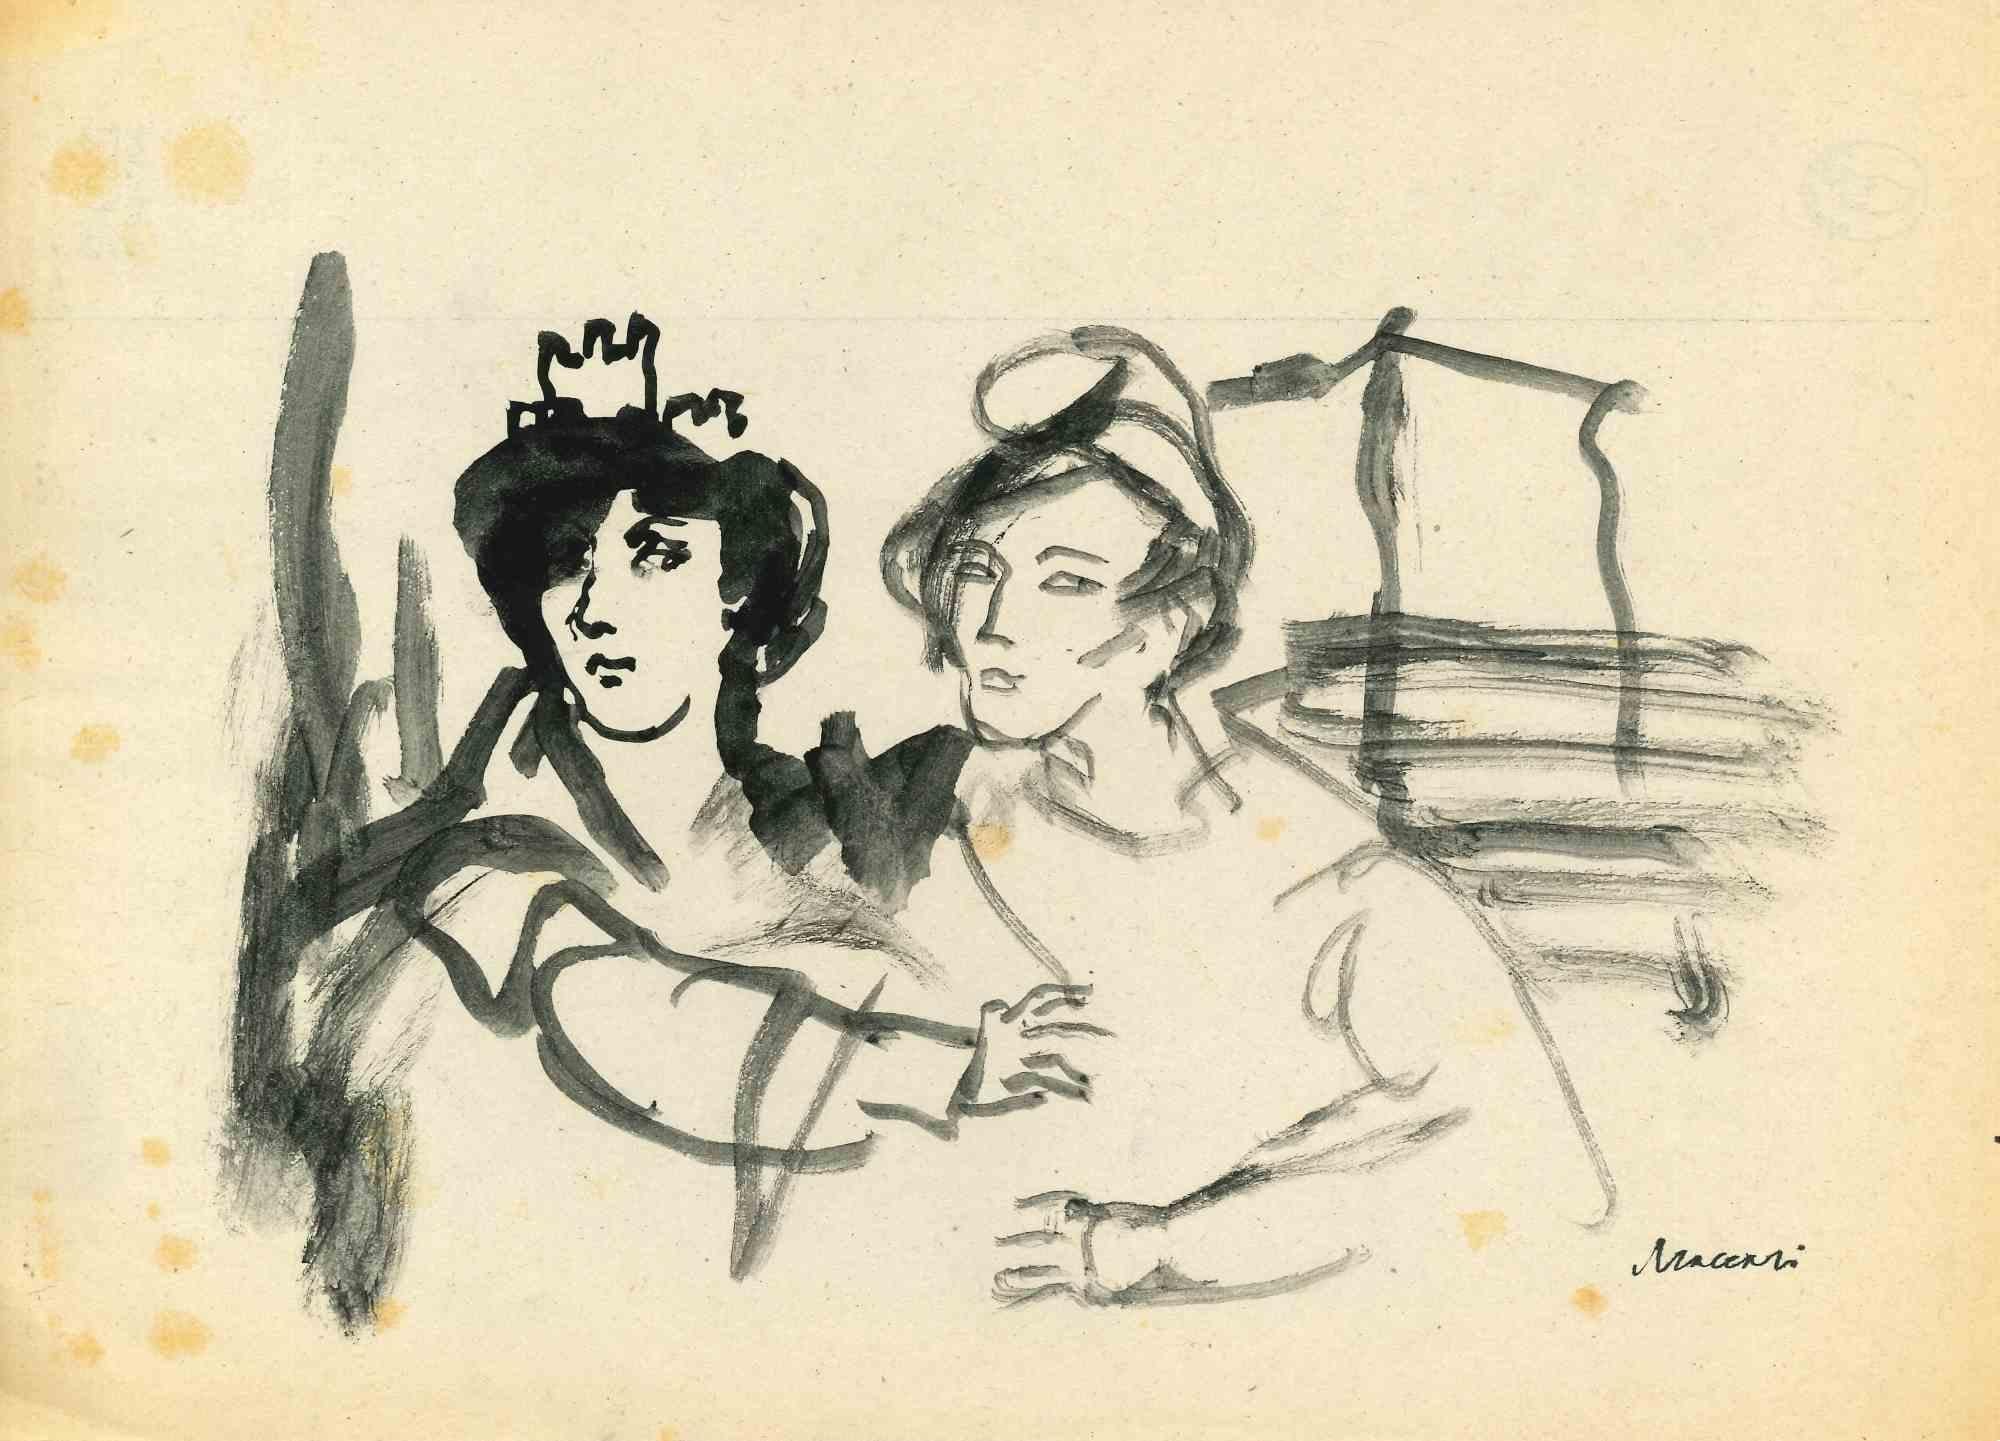 Women is a watercolor drawing realized by Mino Maccari  (1924-1989) in the Mid-20th Century.

Hand-signed.

Good conditions with slight foxing.

Mino Maccari (Siena, 1924-Rome, June 16, 1989) was an Italian writer, painter, engraver and journalist,